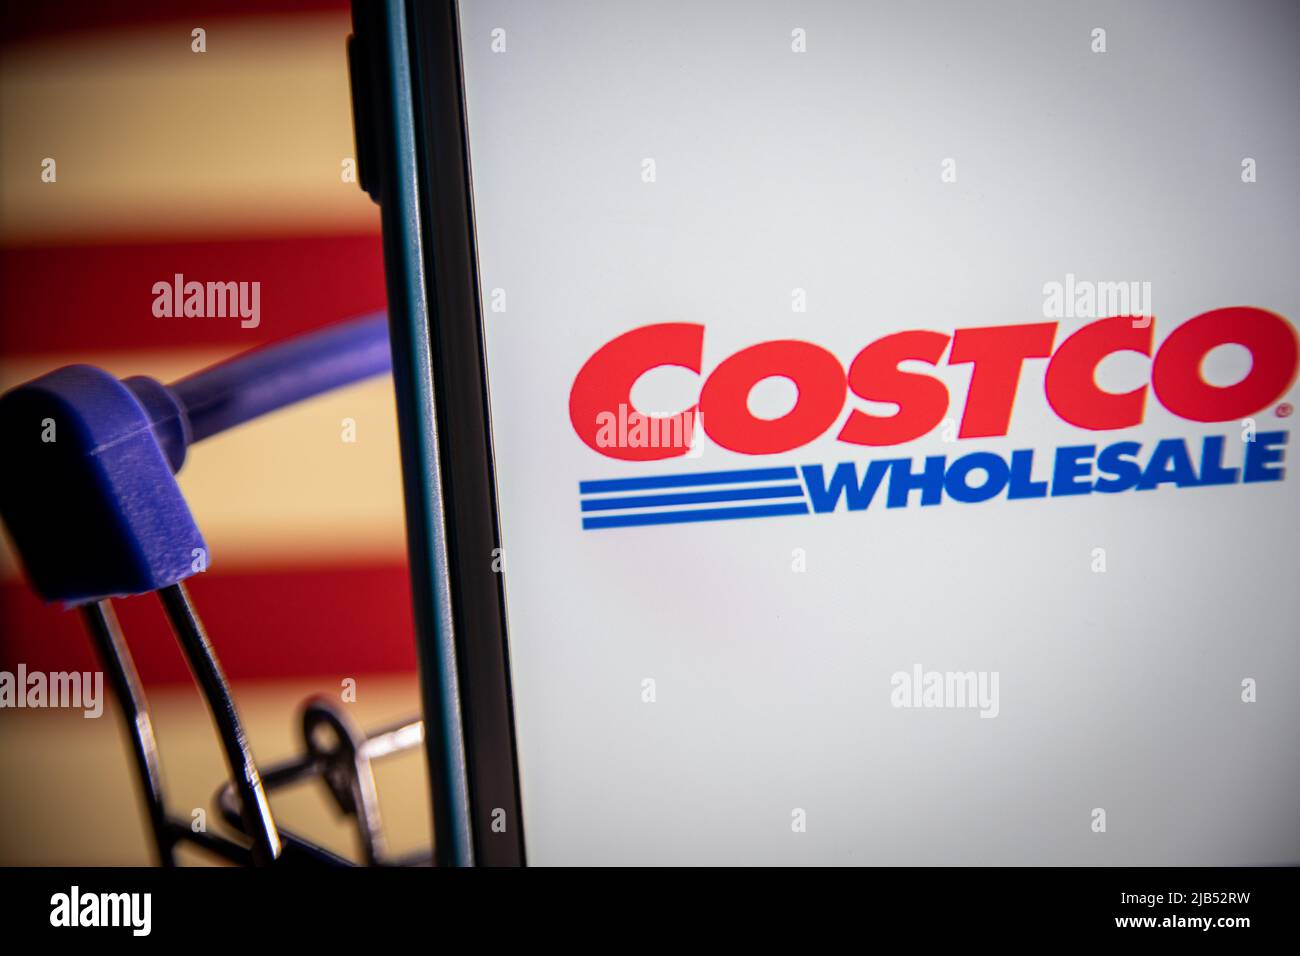 Logo of Costco, an US multinational corporation operates a chain of membership-only warehouse clubs, on iPhone in shopping cart with US flag. Stock Photo